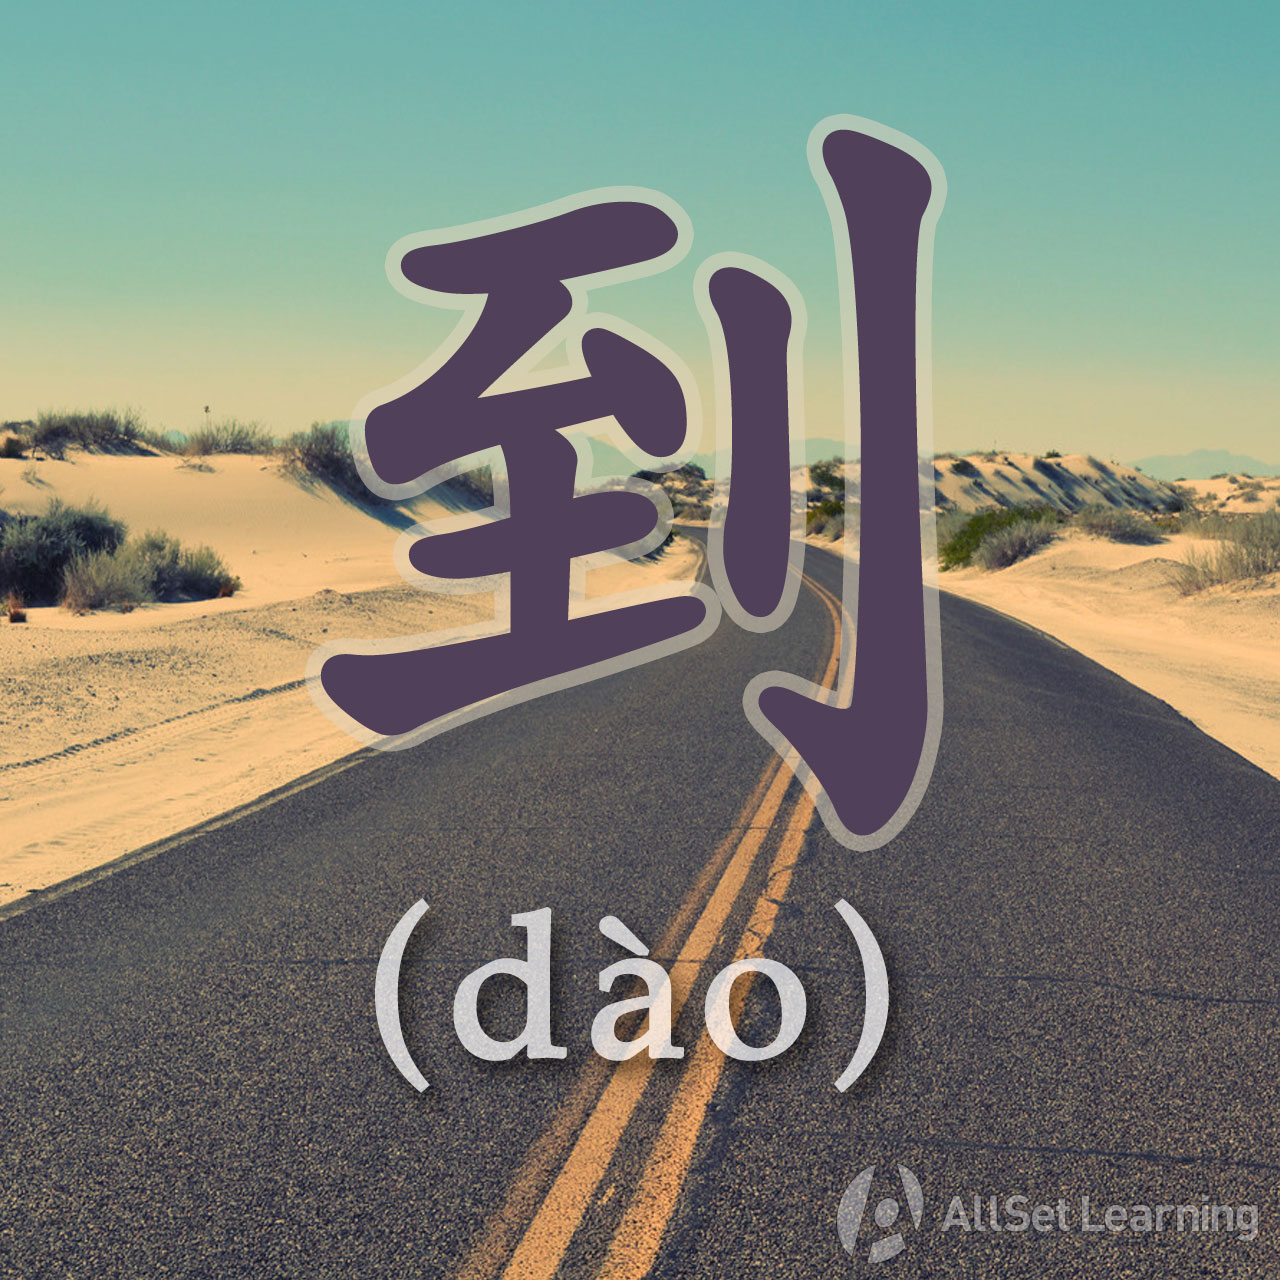 Expressing From To With Cong Dao Chinese Grammar Wiki